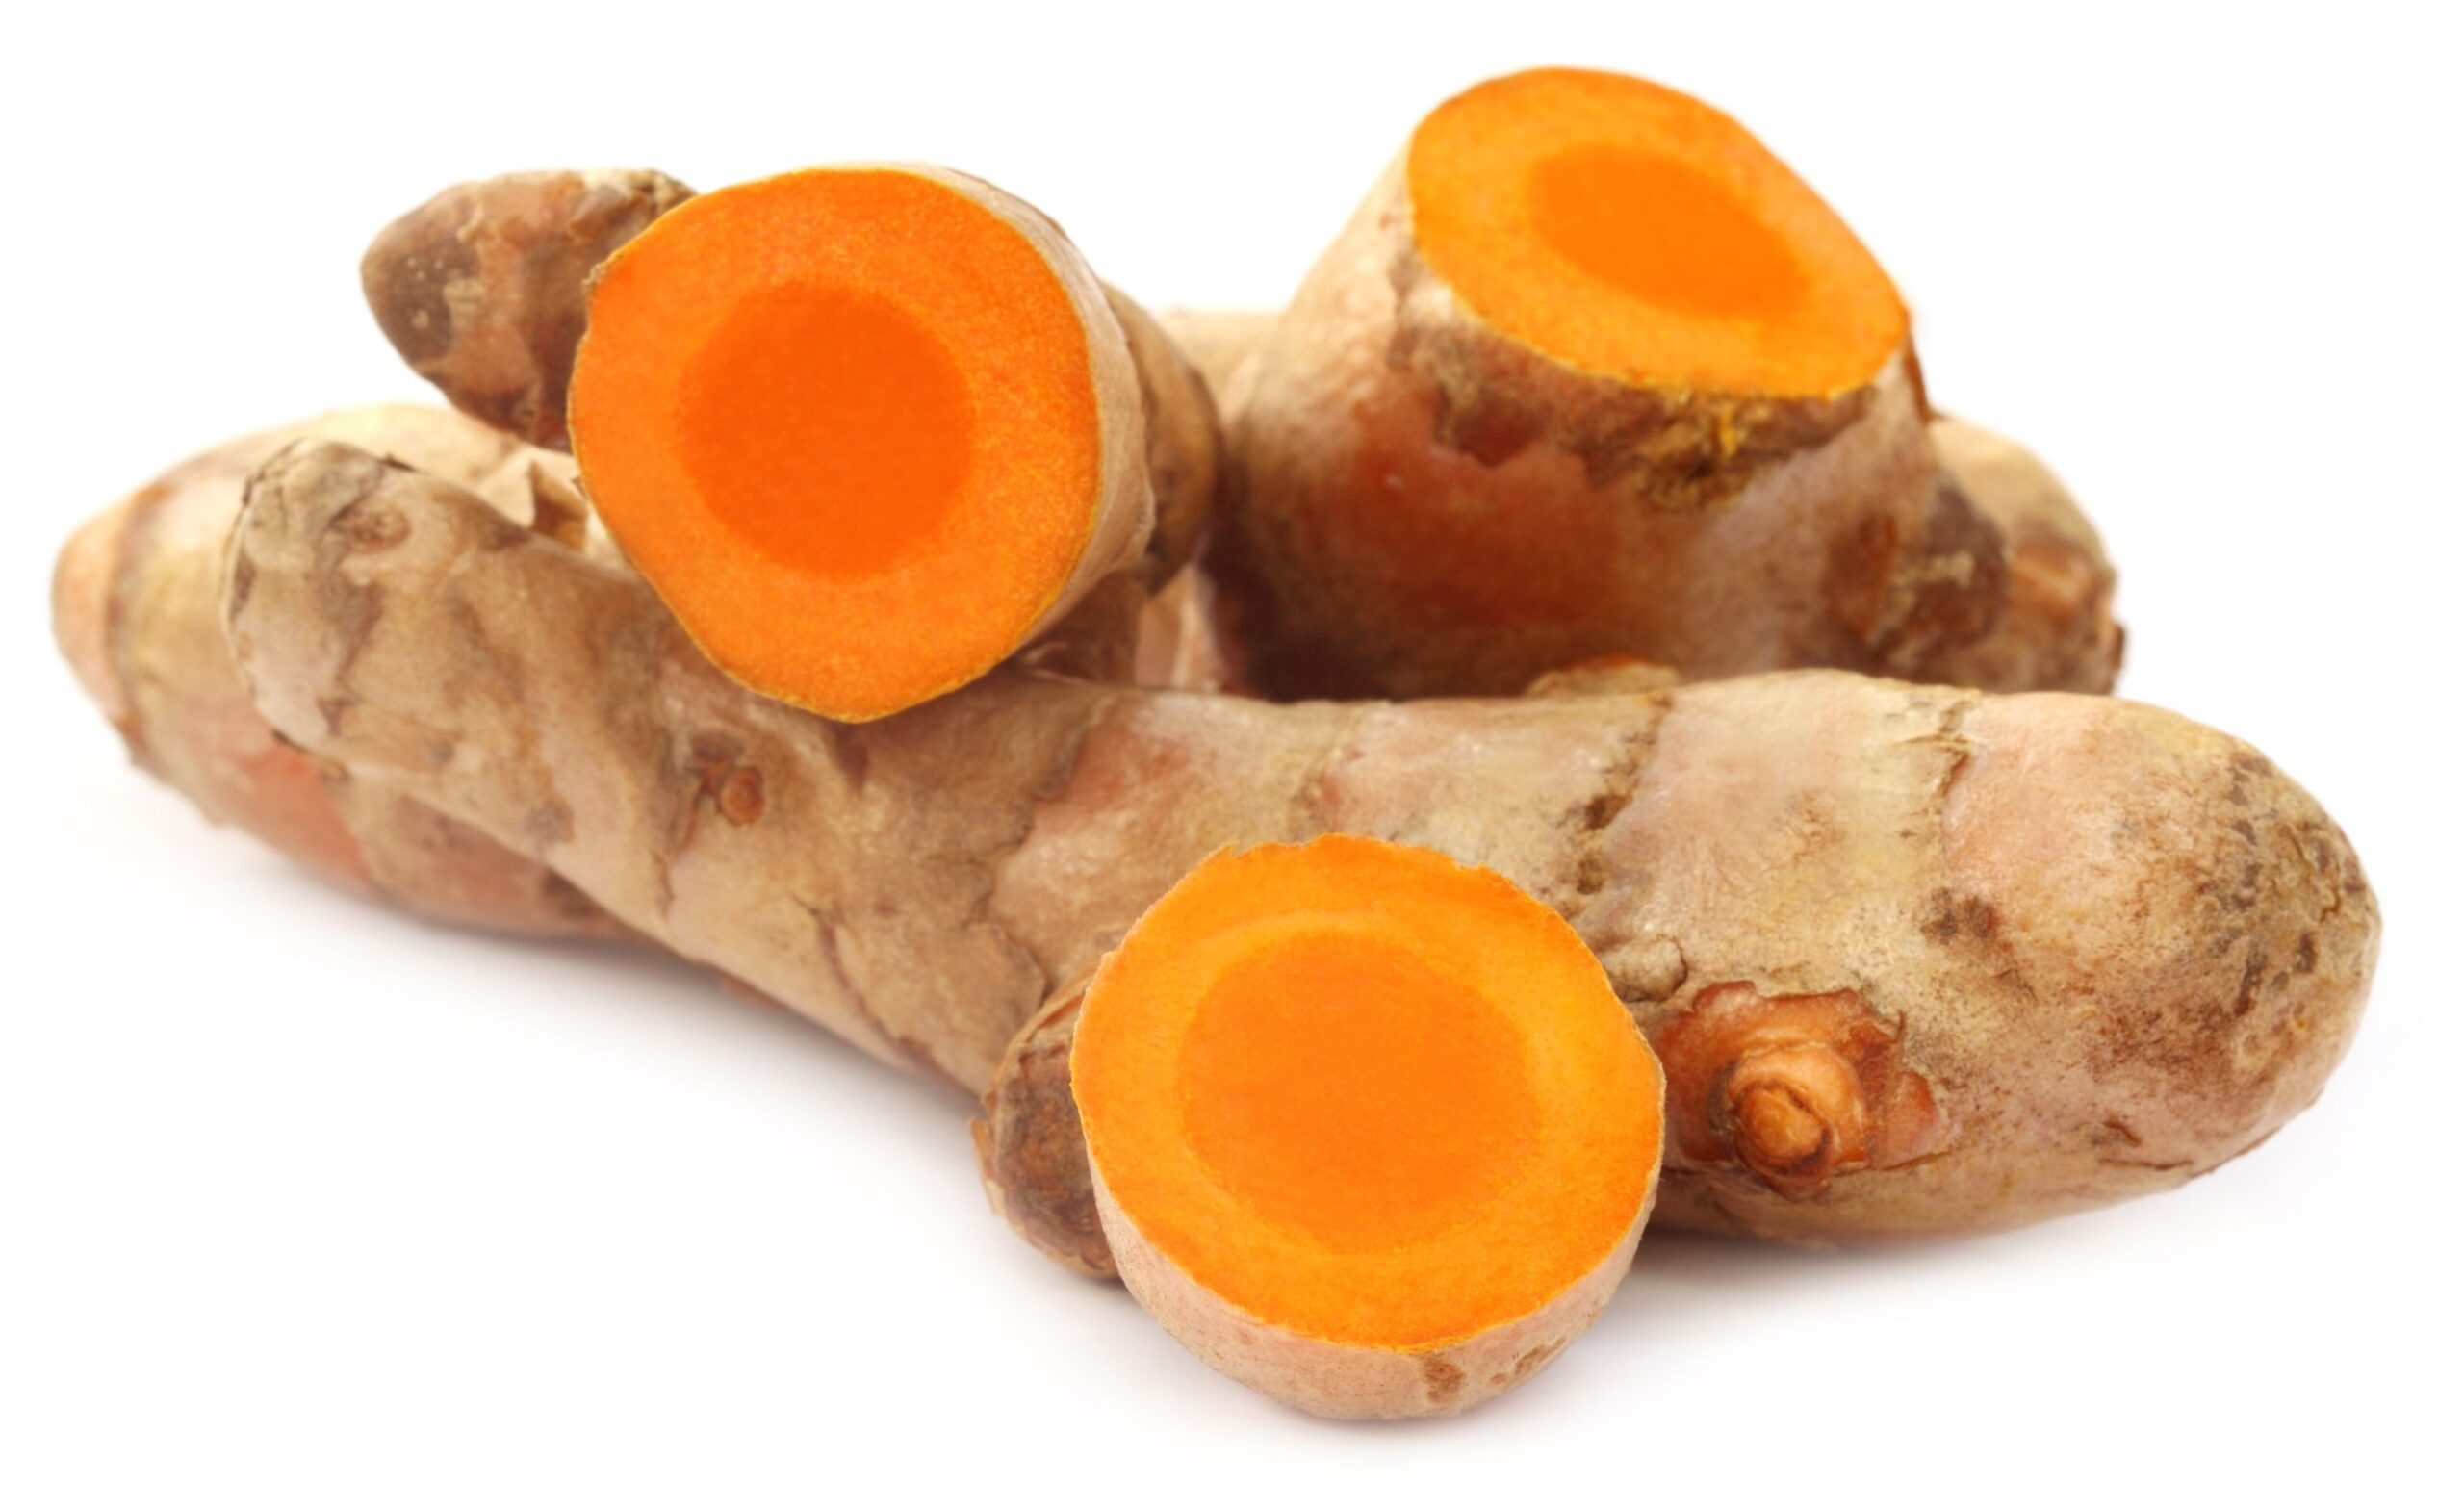 Turmeric Essential Oil Uses and Benefits